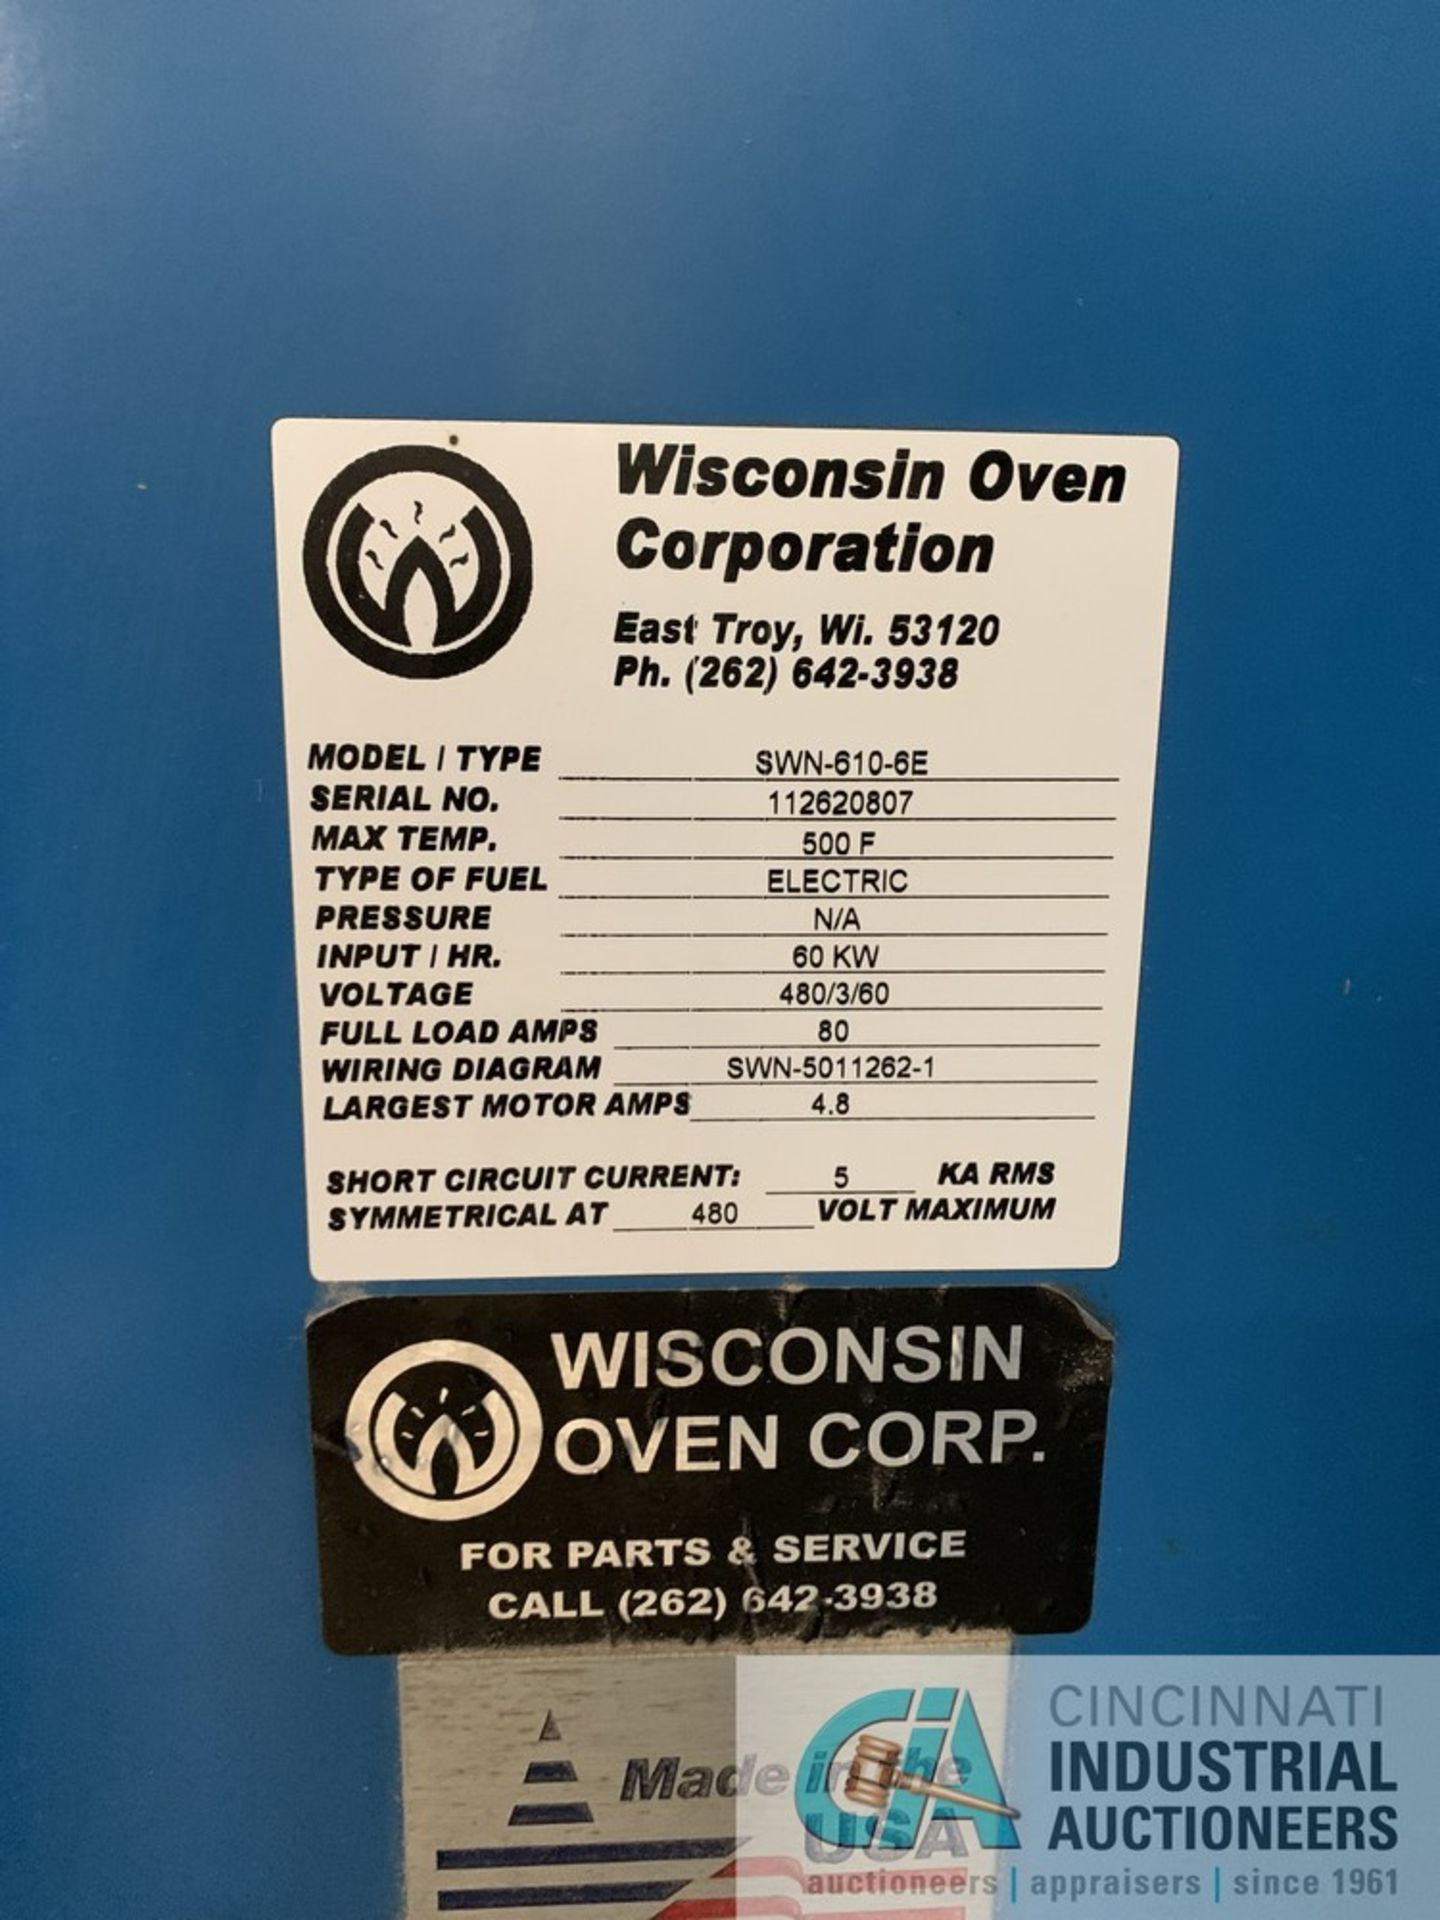 6' X 10' X 6' WISCONSIN OVEN MODEL SWN-610-6E ELECTRIC BATCH OVEN; S/N 11262807, 500 DEGREE, CONTROL - Image 7 of 13